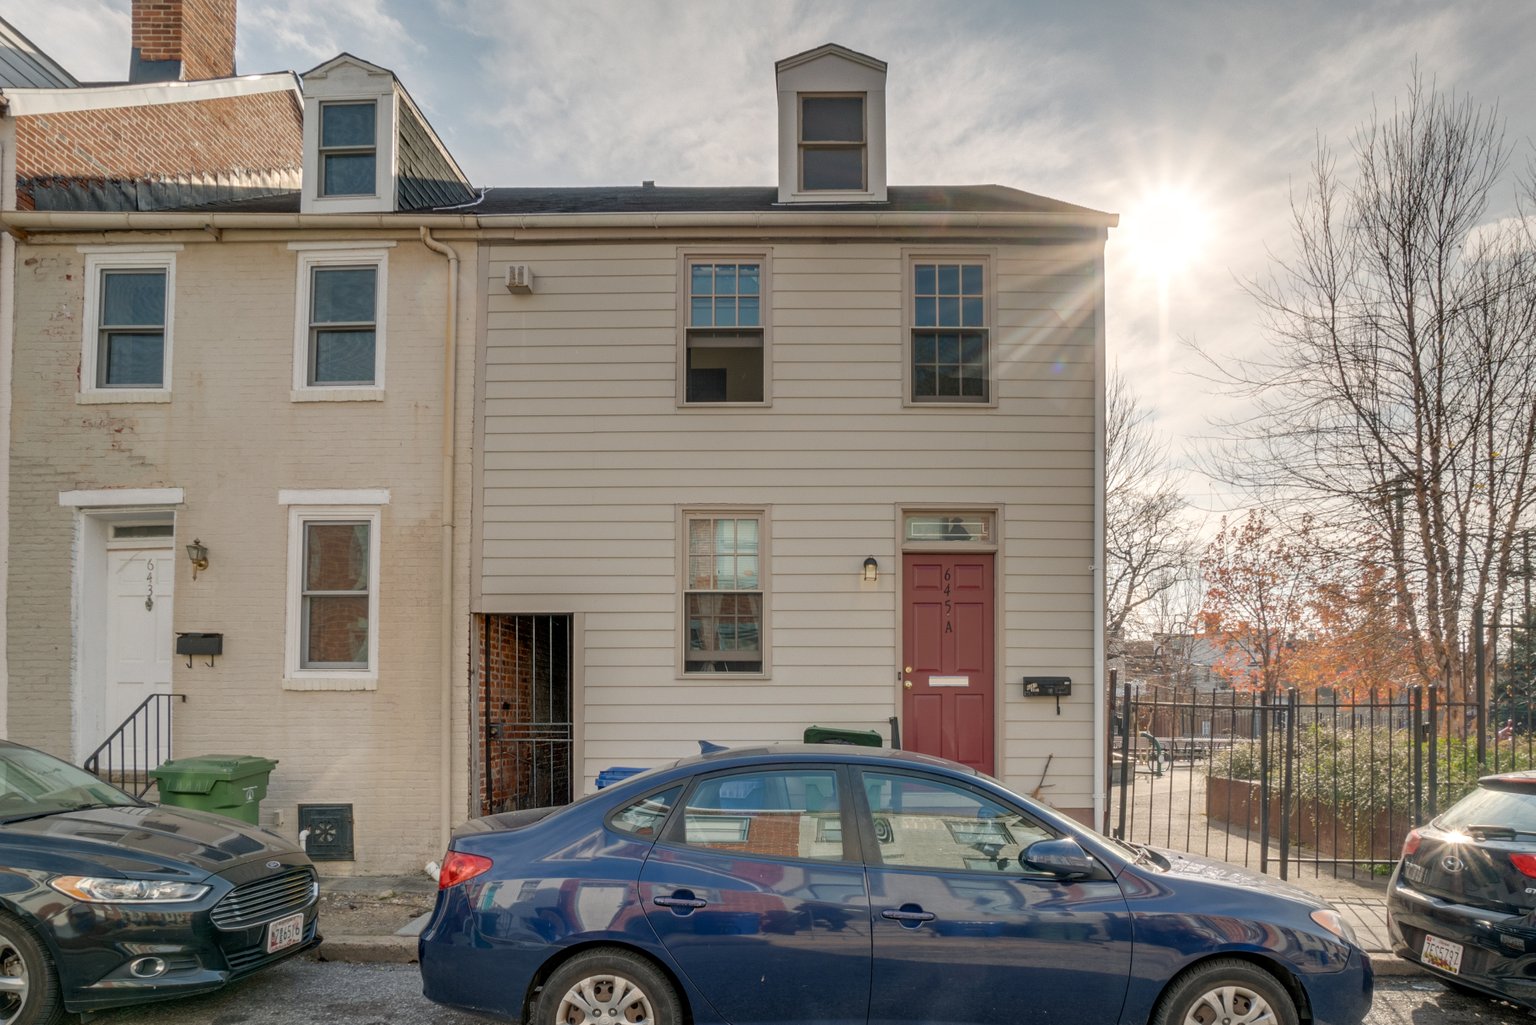 645 Melvin Drive: 2 Apartments in the heart of Ridgely’s Delight / End Unit / Lead Free / Fully Leased